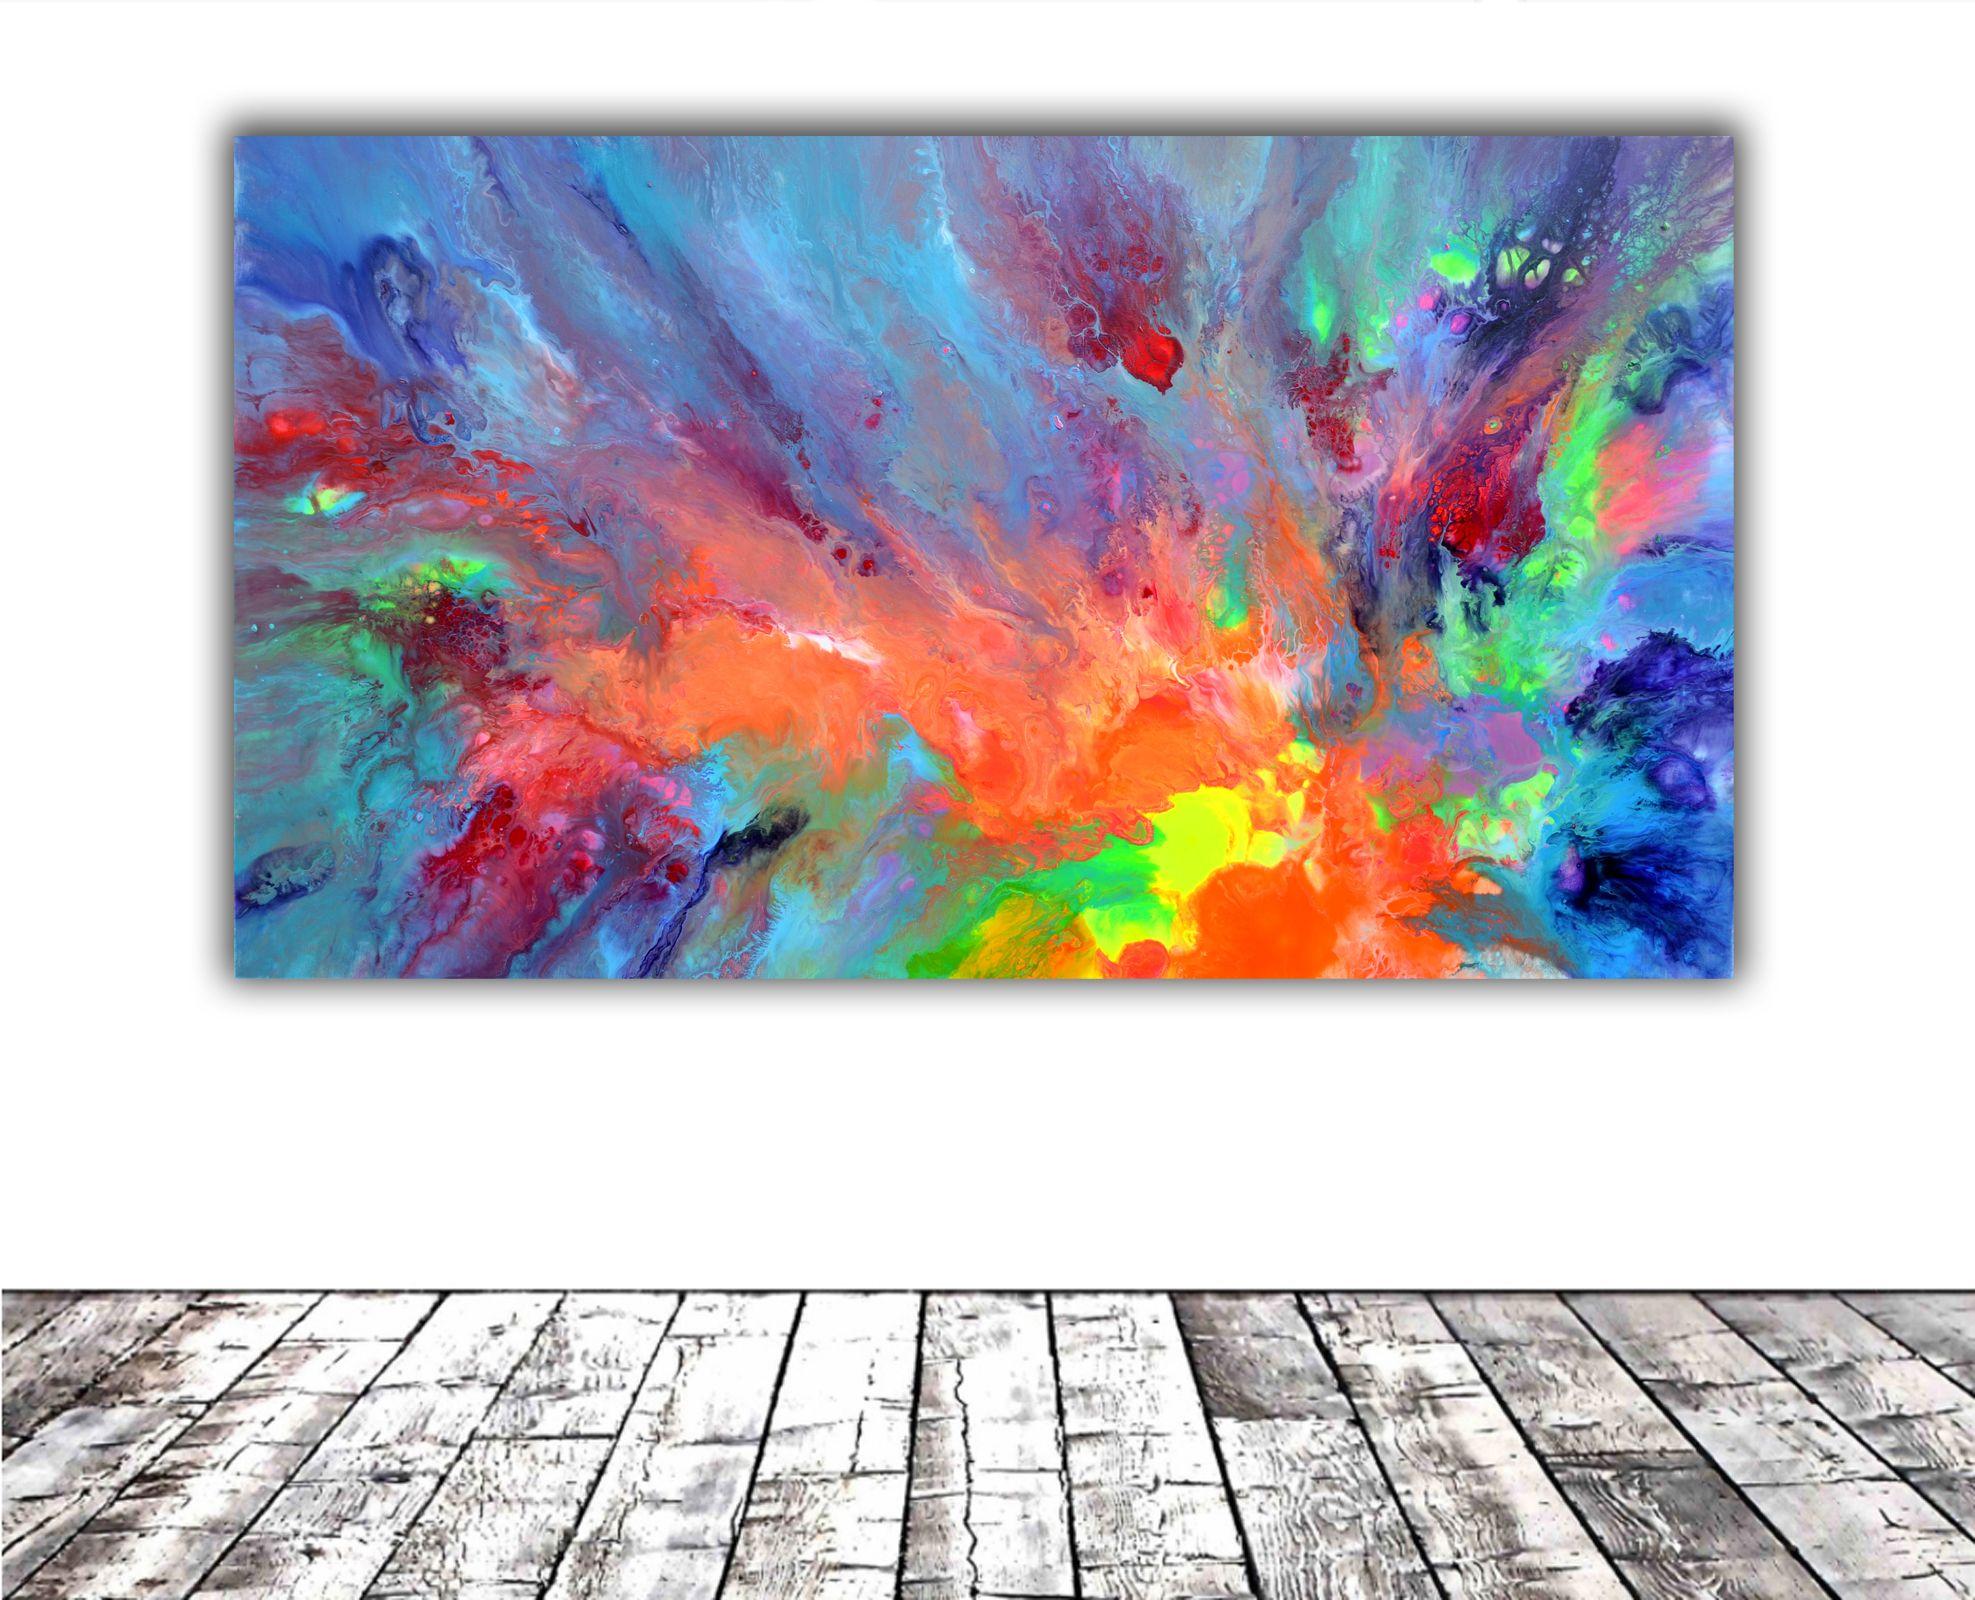 Ready to hang with the edges painted - GALLERY 3D QUALITY  Size: 140x80X4 cm, 55.12x31.5x1.6 inches.  A very colourful piece of art, as a focal point it will bring a large space to life. Some colours could not be caught by the camera.  Will be